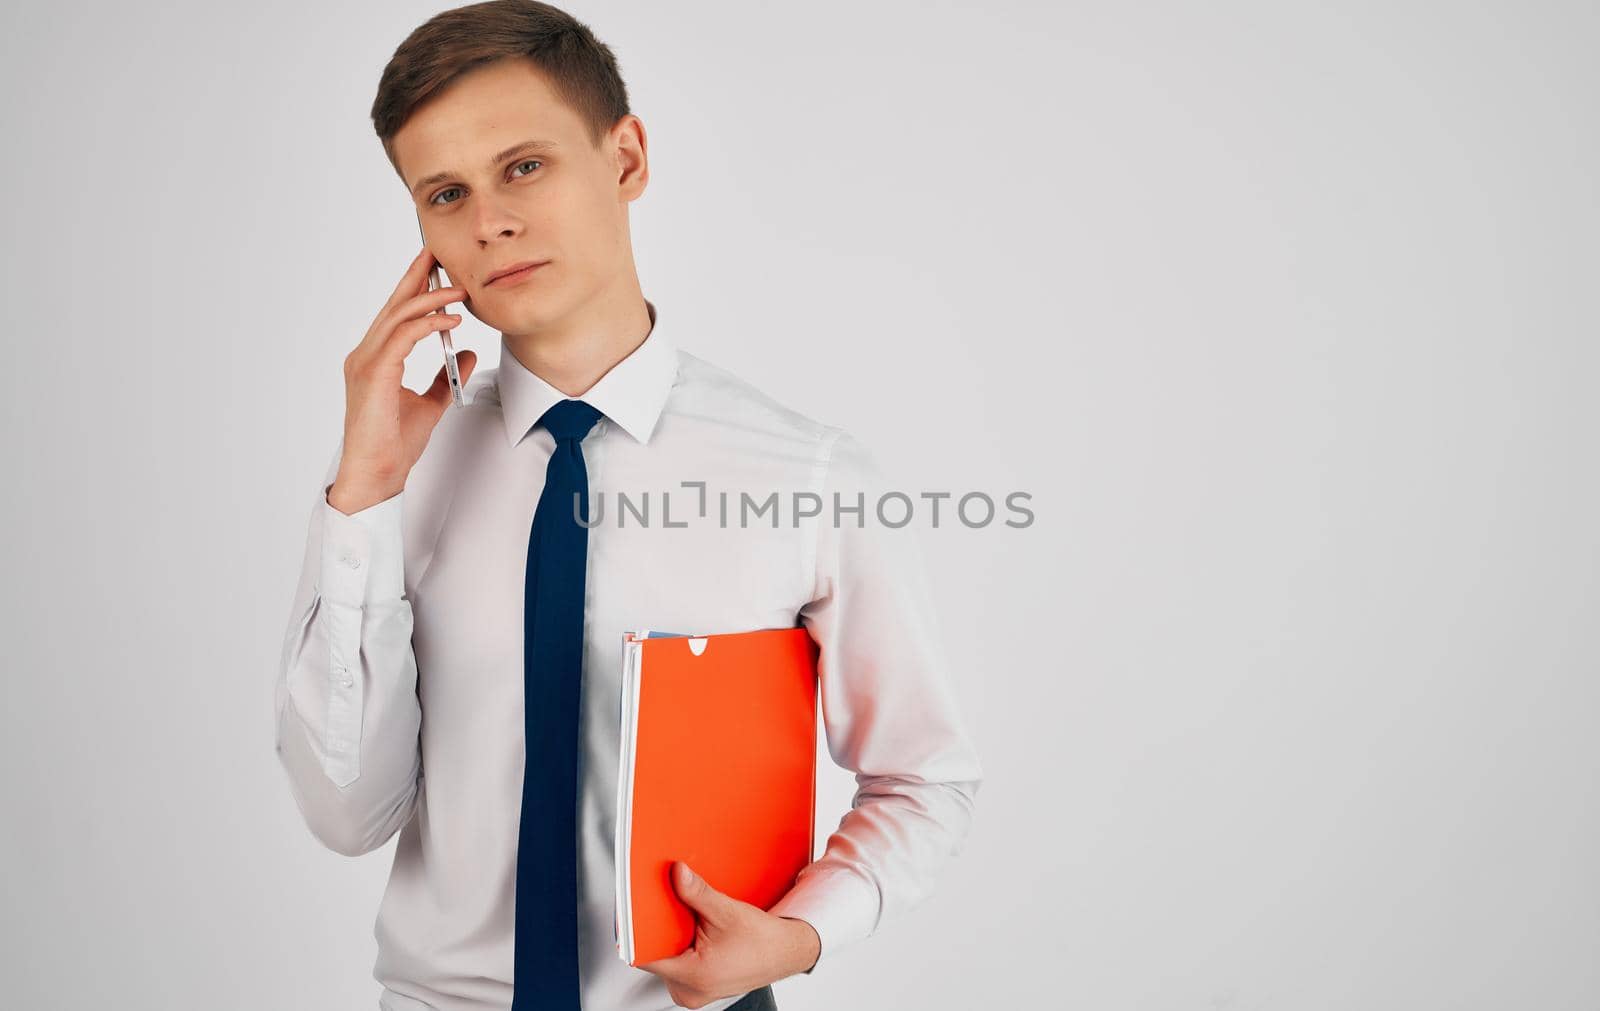 business man in a suit with a tie official manager communication. High quality photo